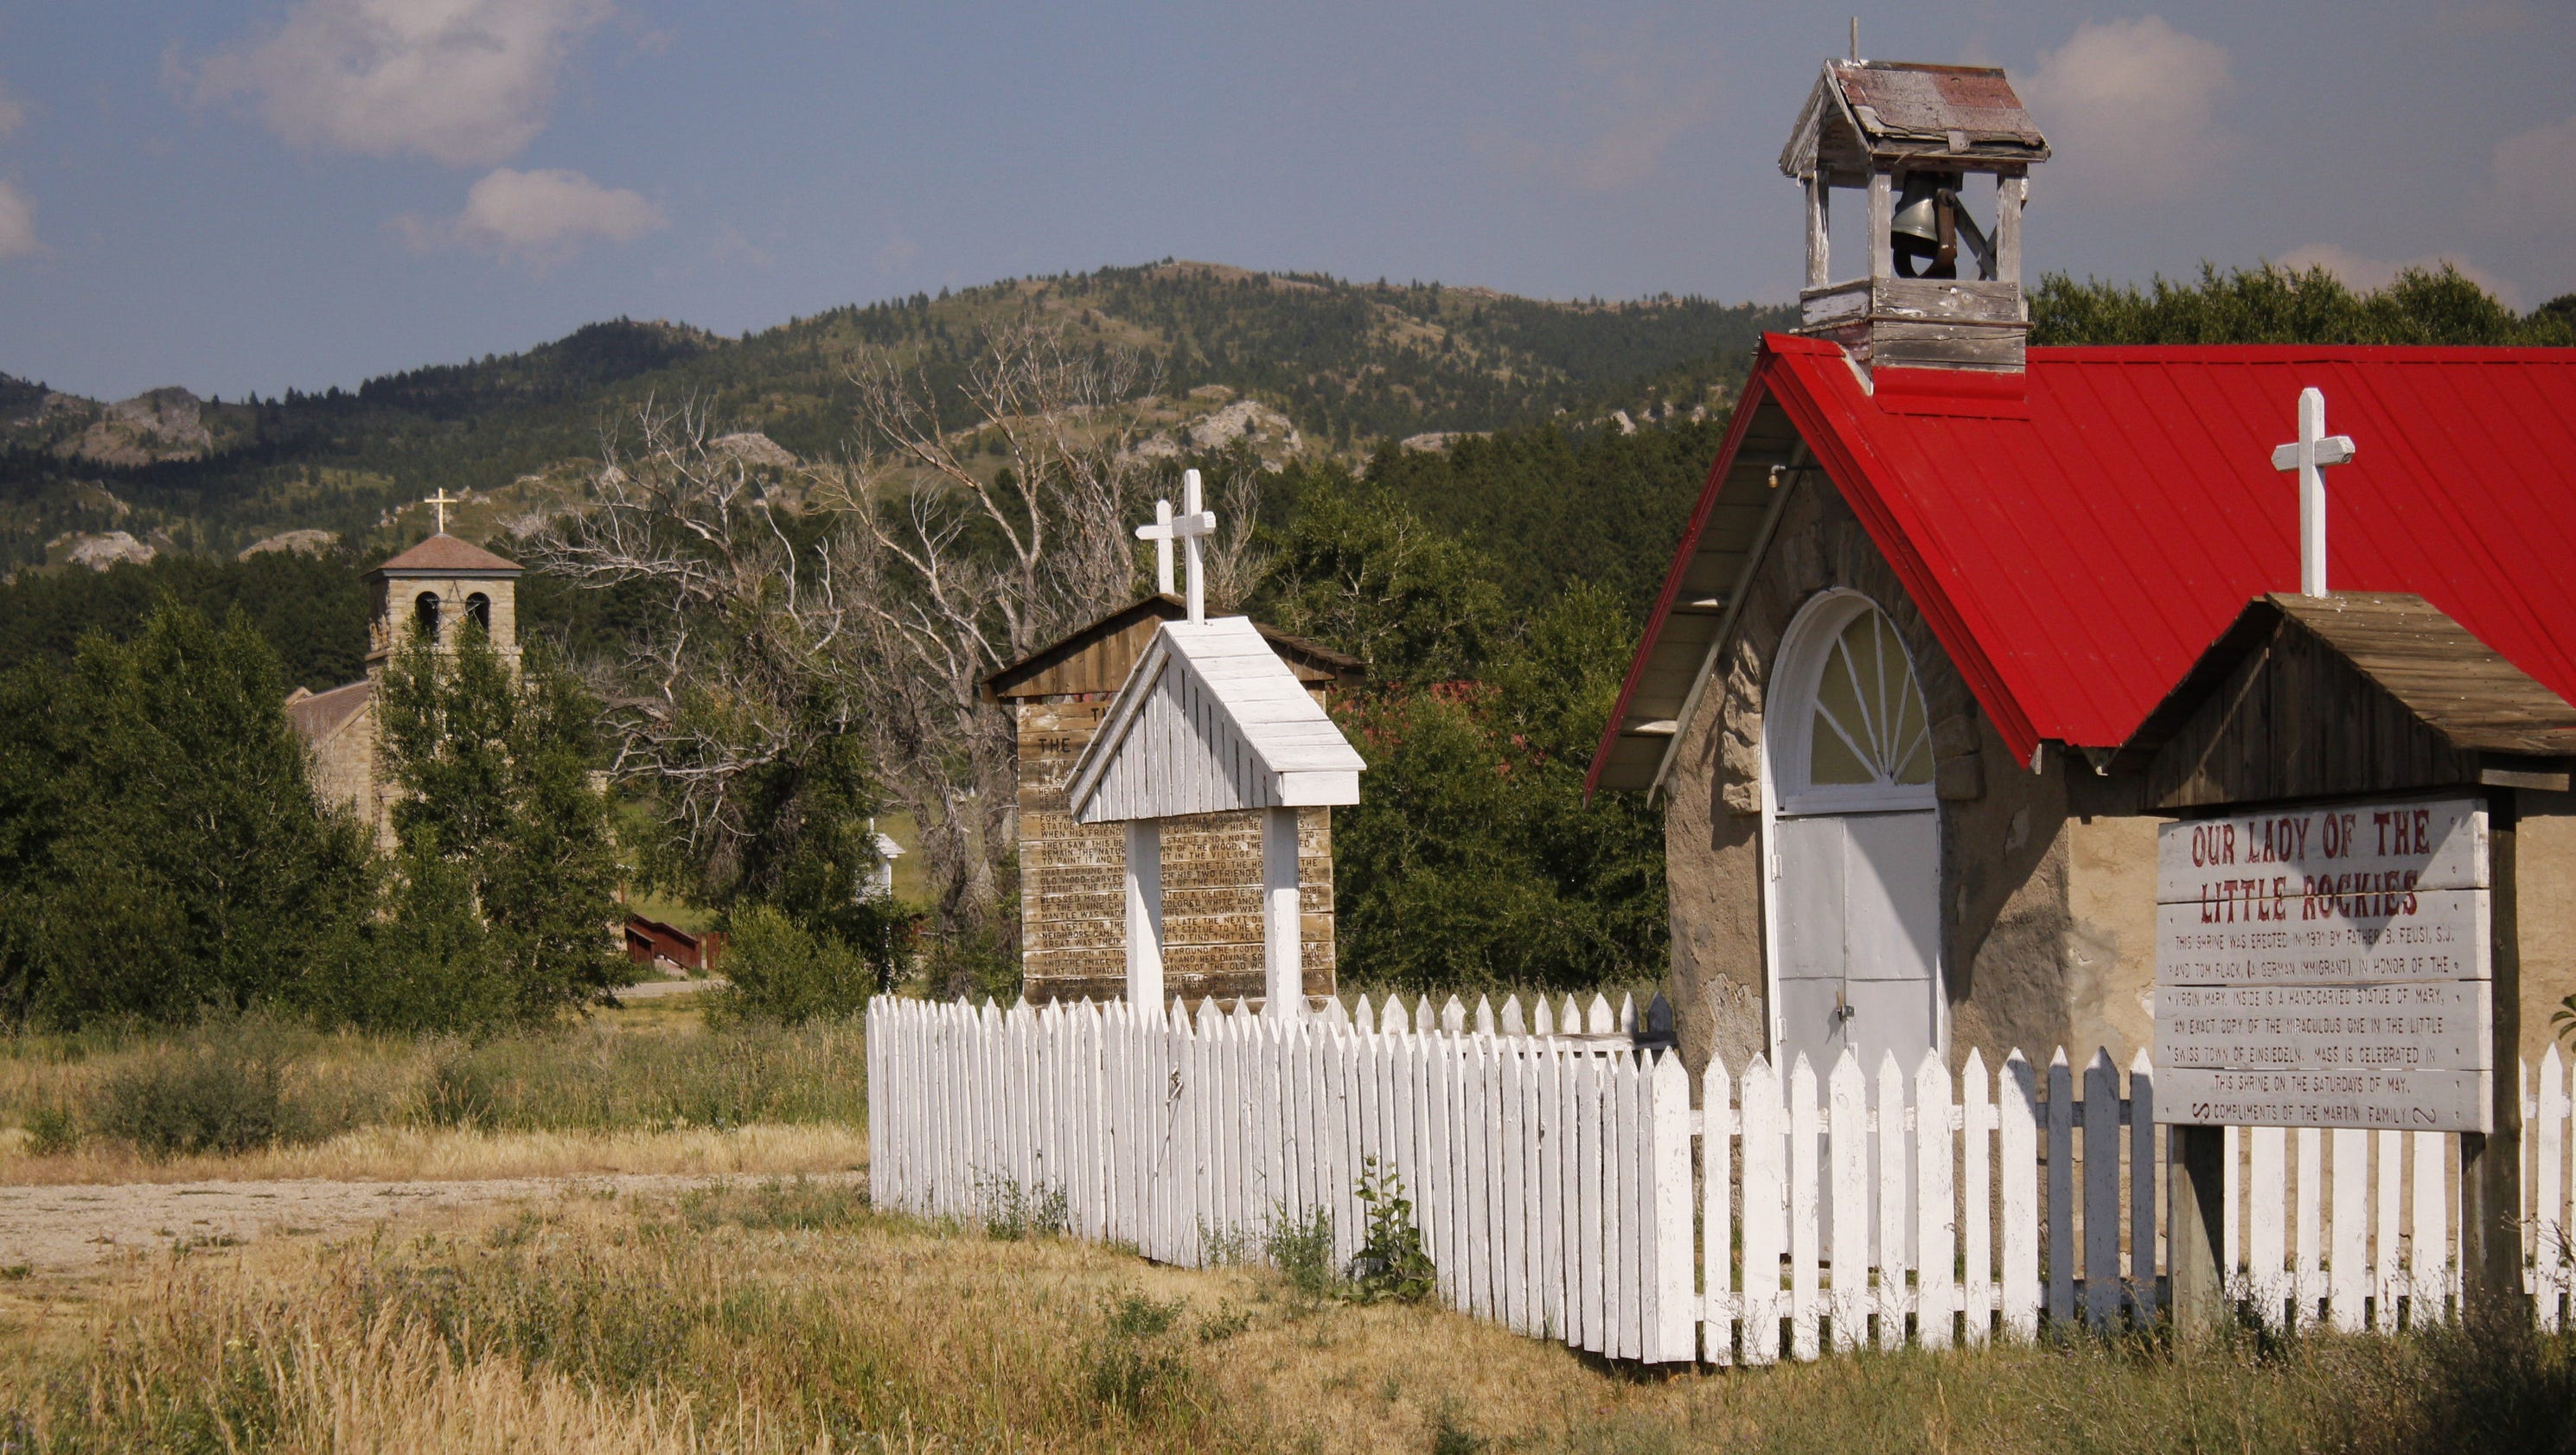 Montana reservations reportedly 'dumping grounds' for predatory priests